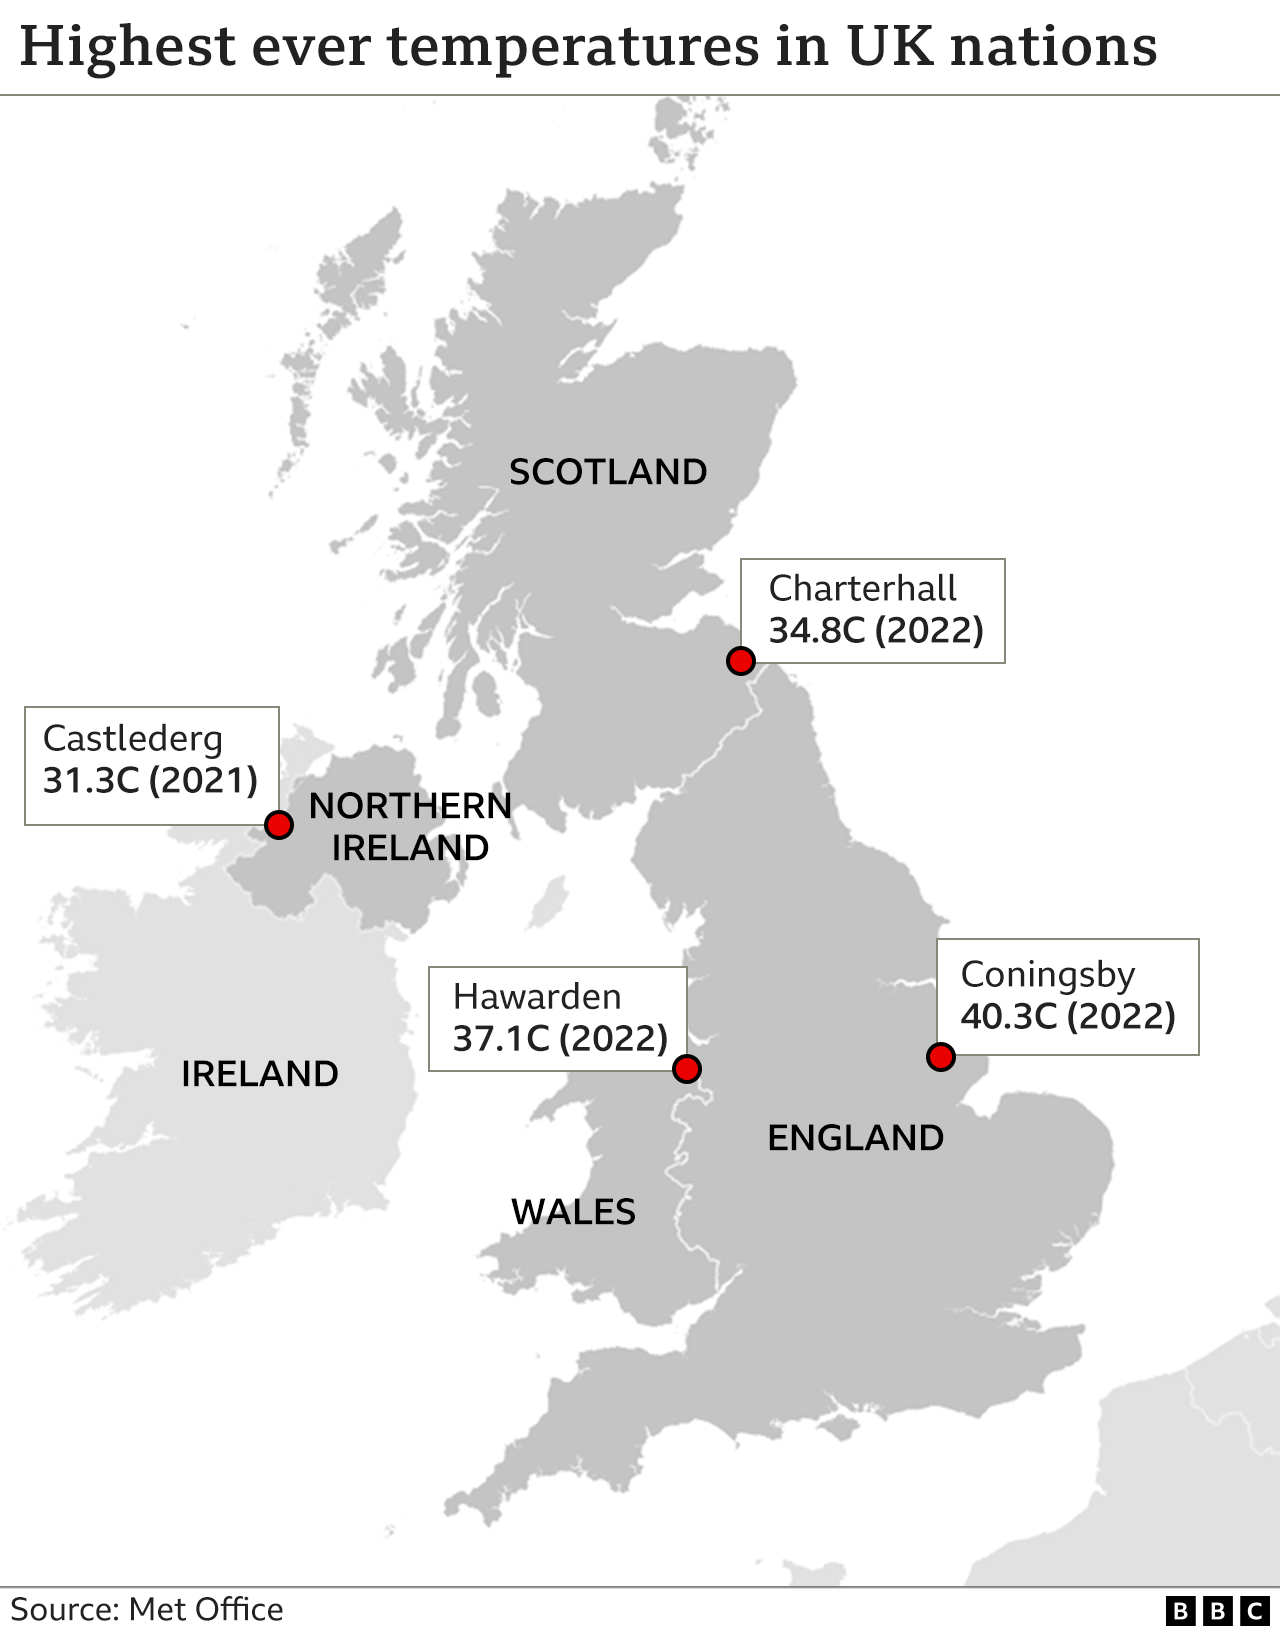 Map showing record temperatures in UK nations.